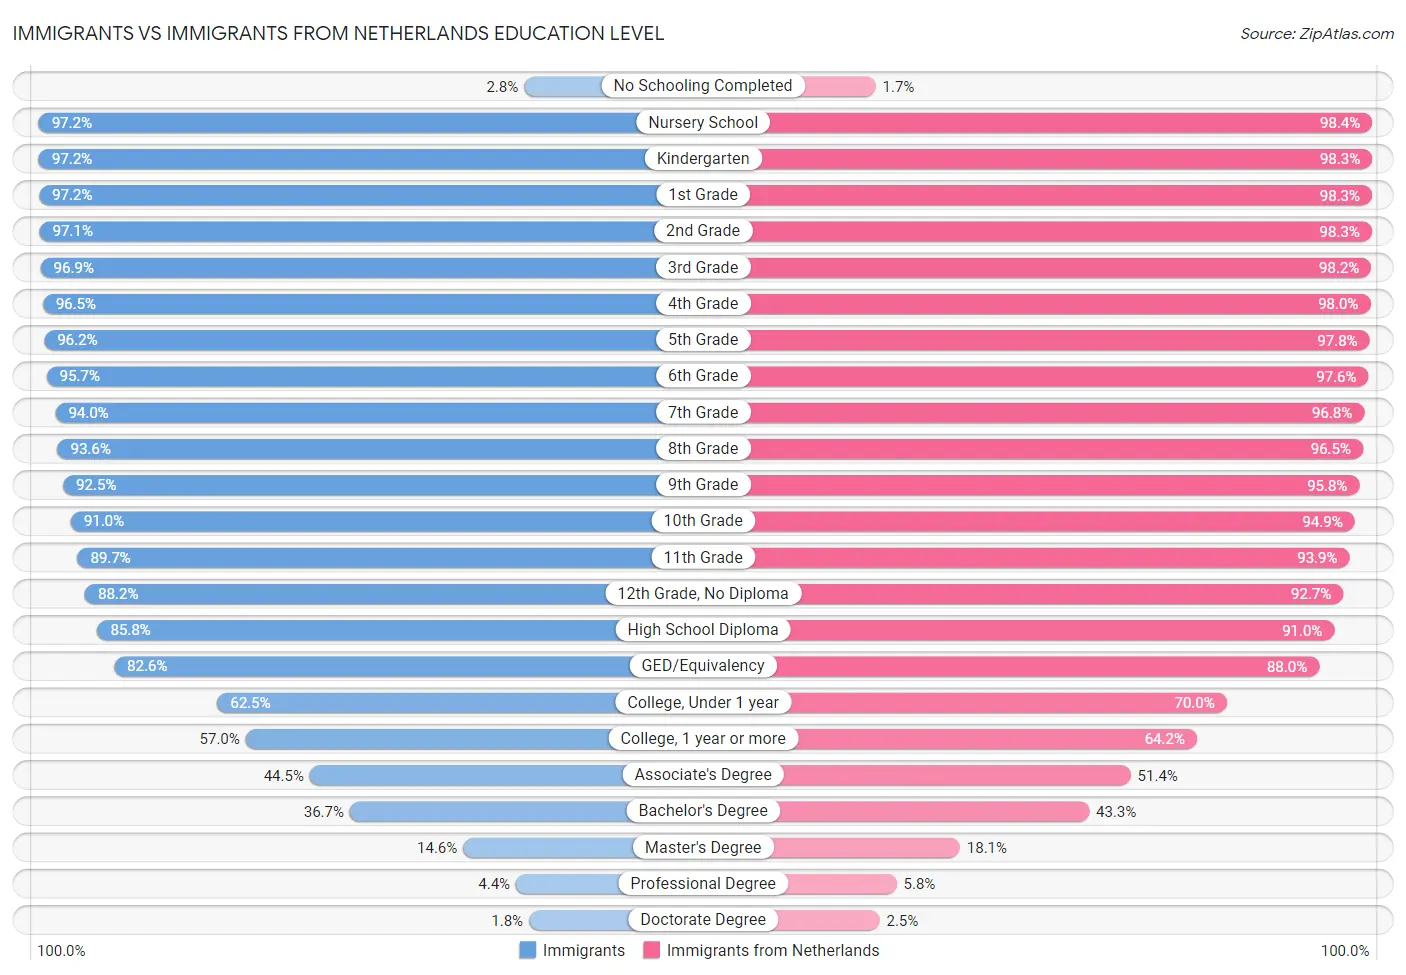 Immigrants vs Immigrants from Netherlands Education Level